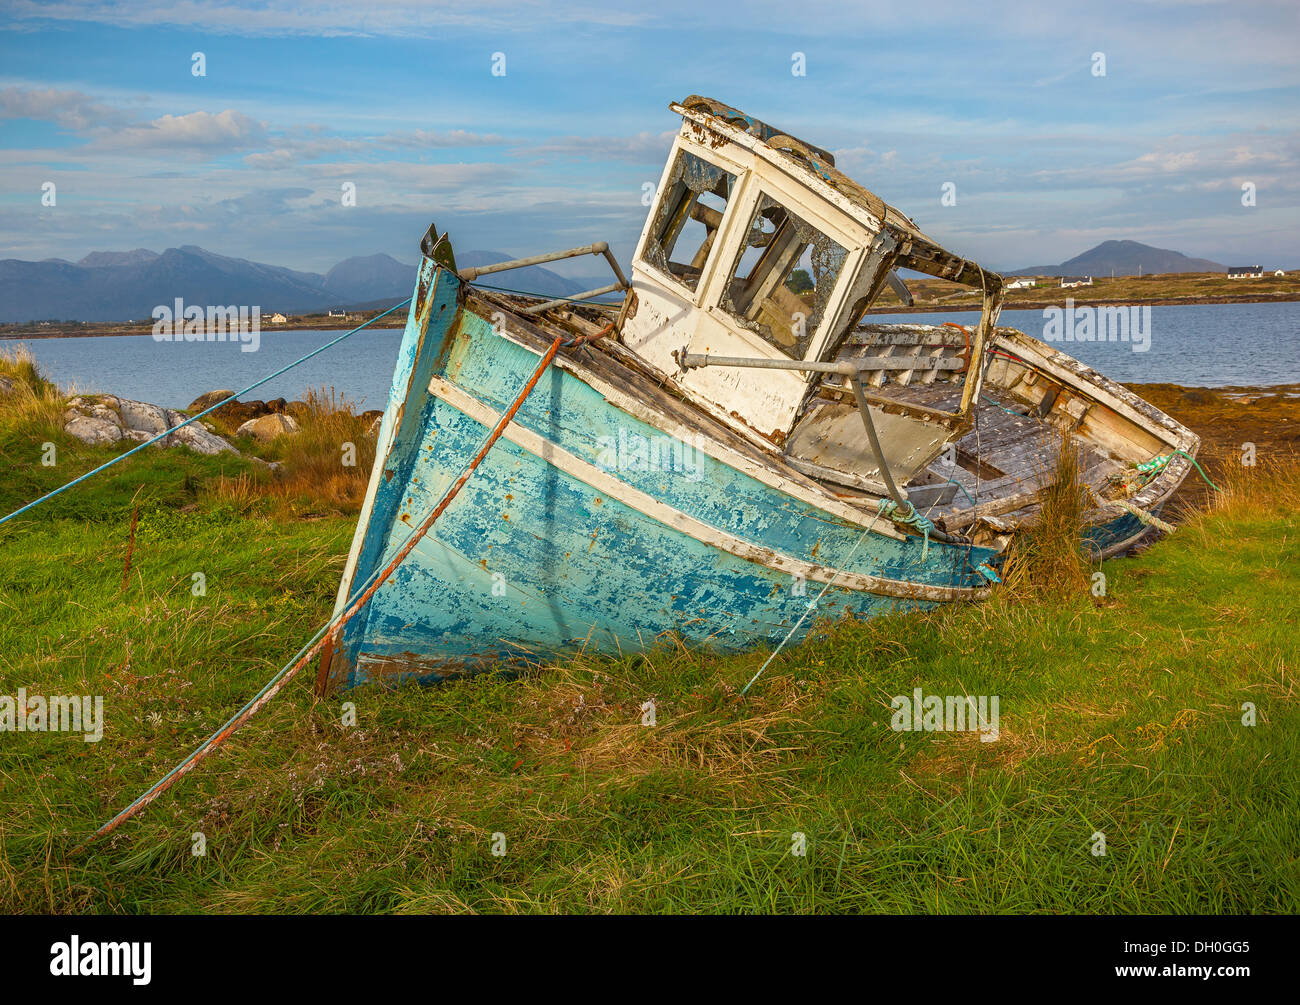 County Galway, Ireland: Weathered blue fishing boat near the shoreline of Bertraghboy Bay in the village of Roundstone Stock Photo